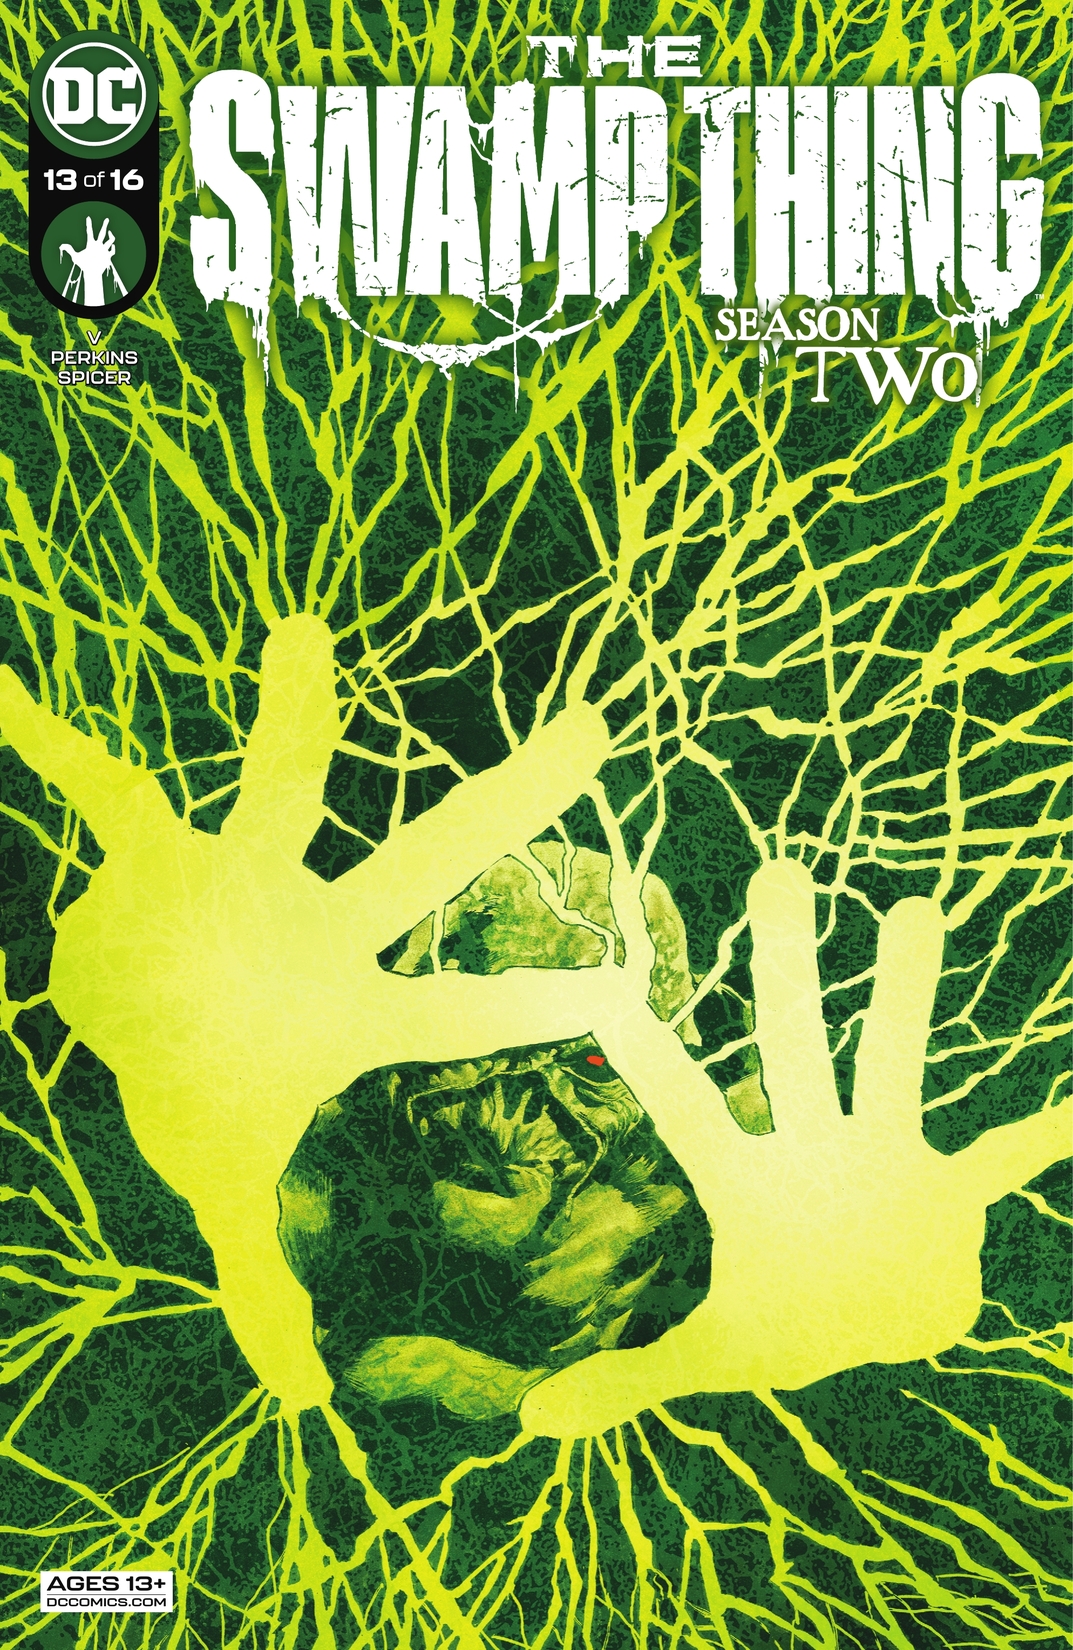 The Swamp Thing #13 preview images